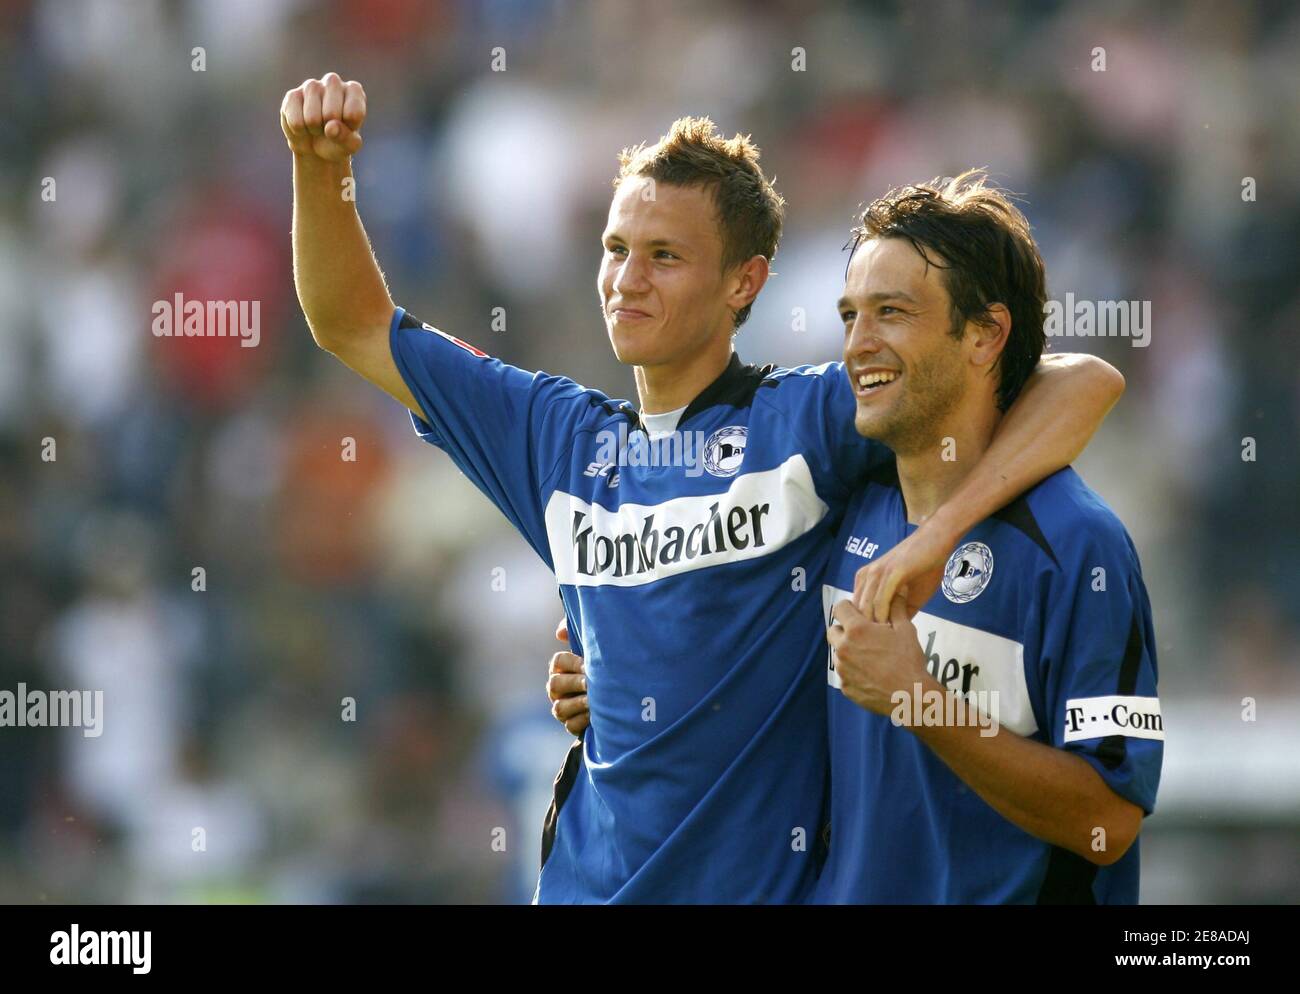 Markus Schuler High Resolution Stock Photography and Images - Alamy